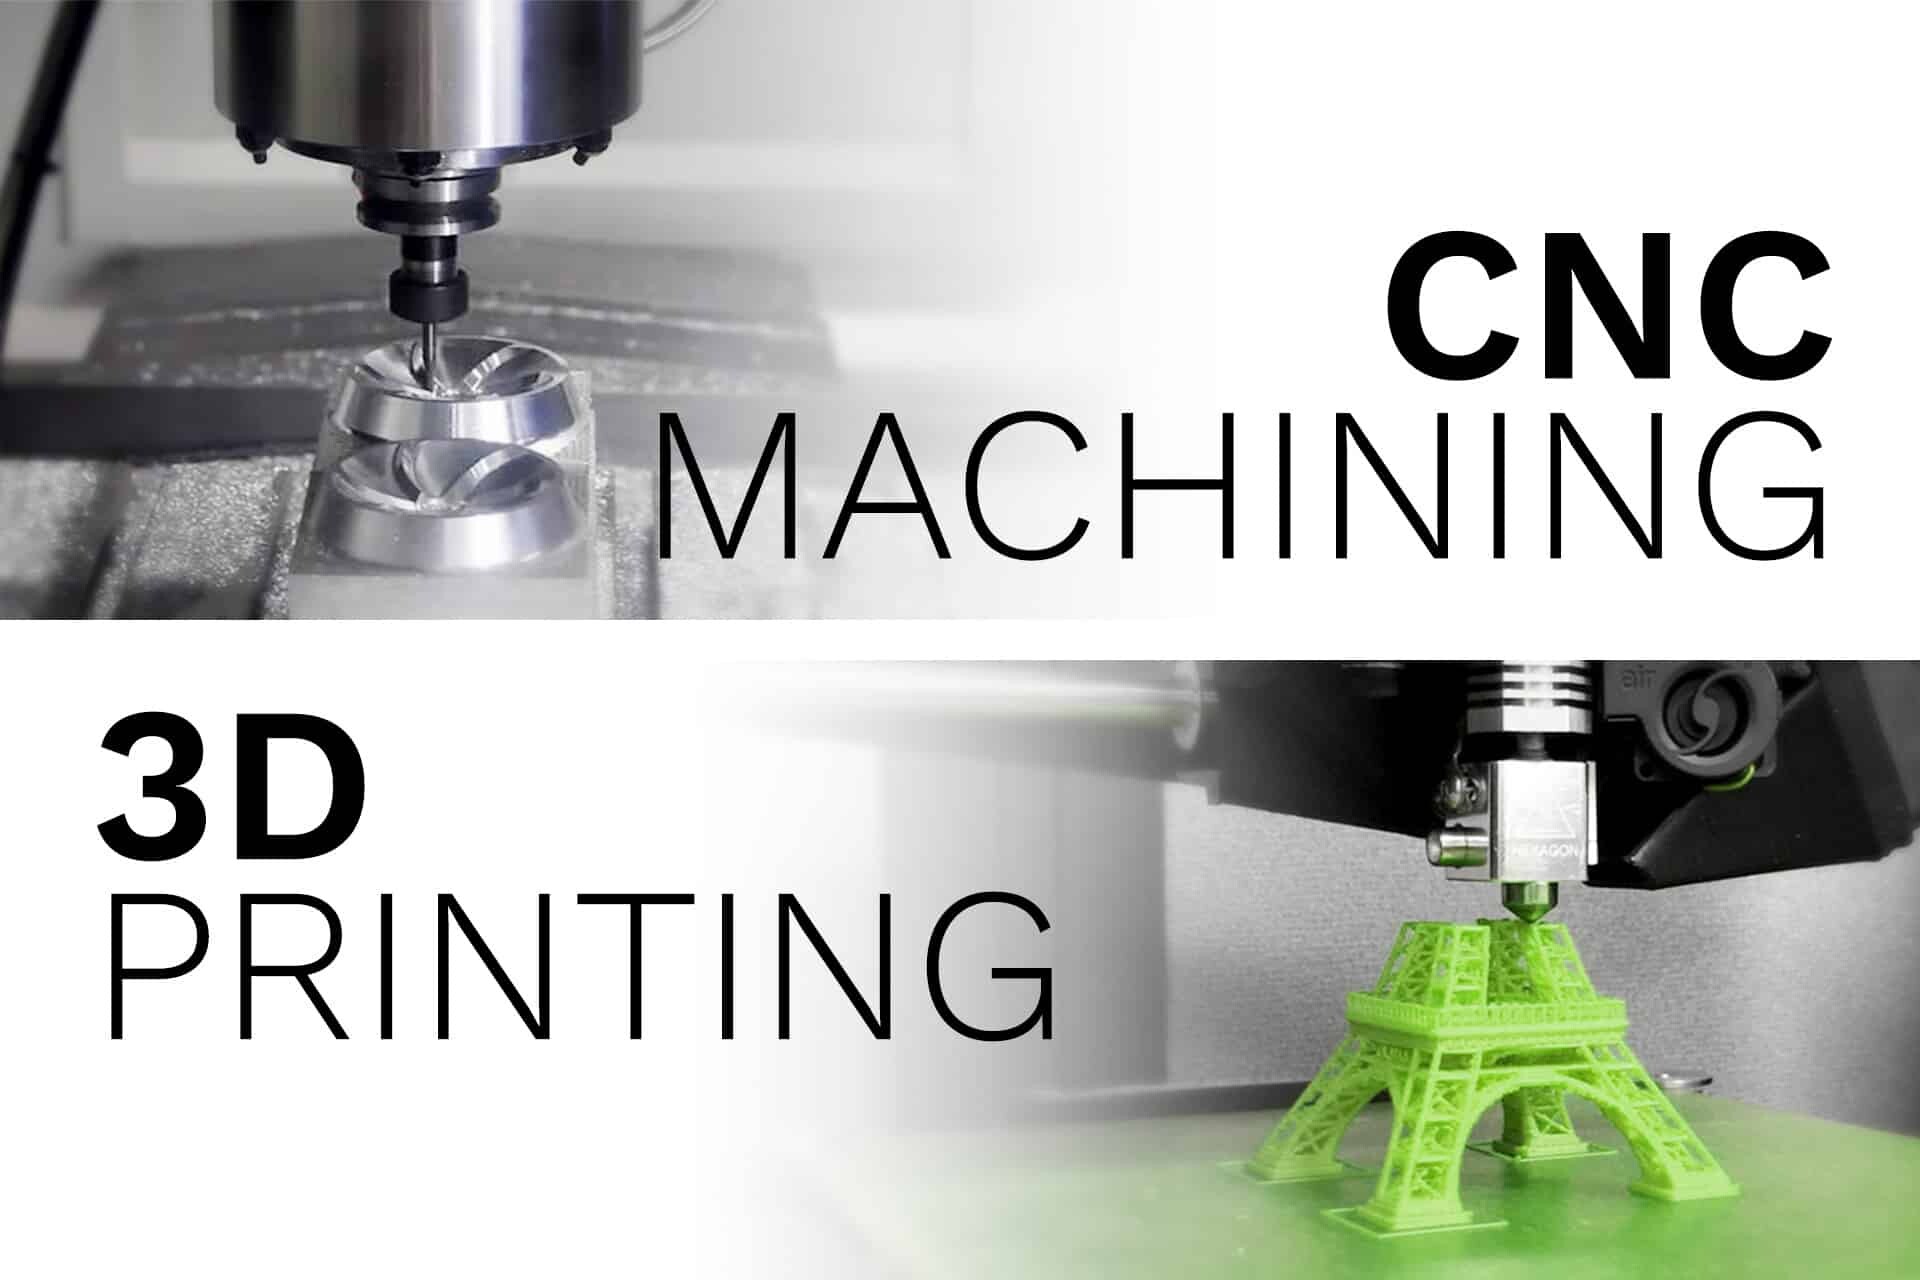 CNC machining or 3D printing for your project?